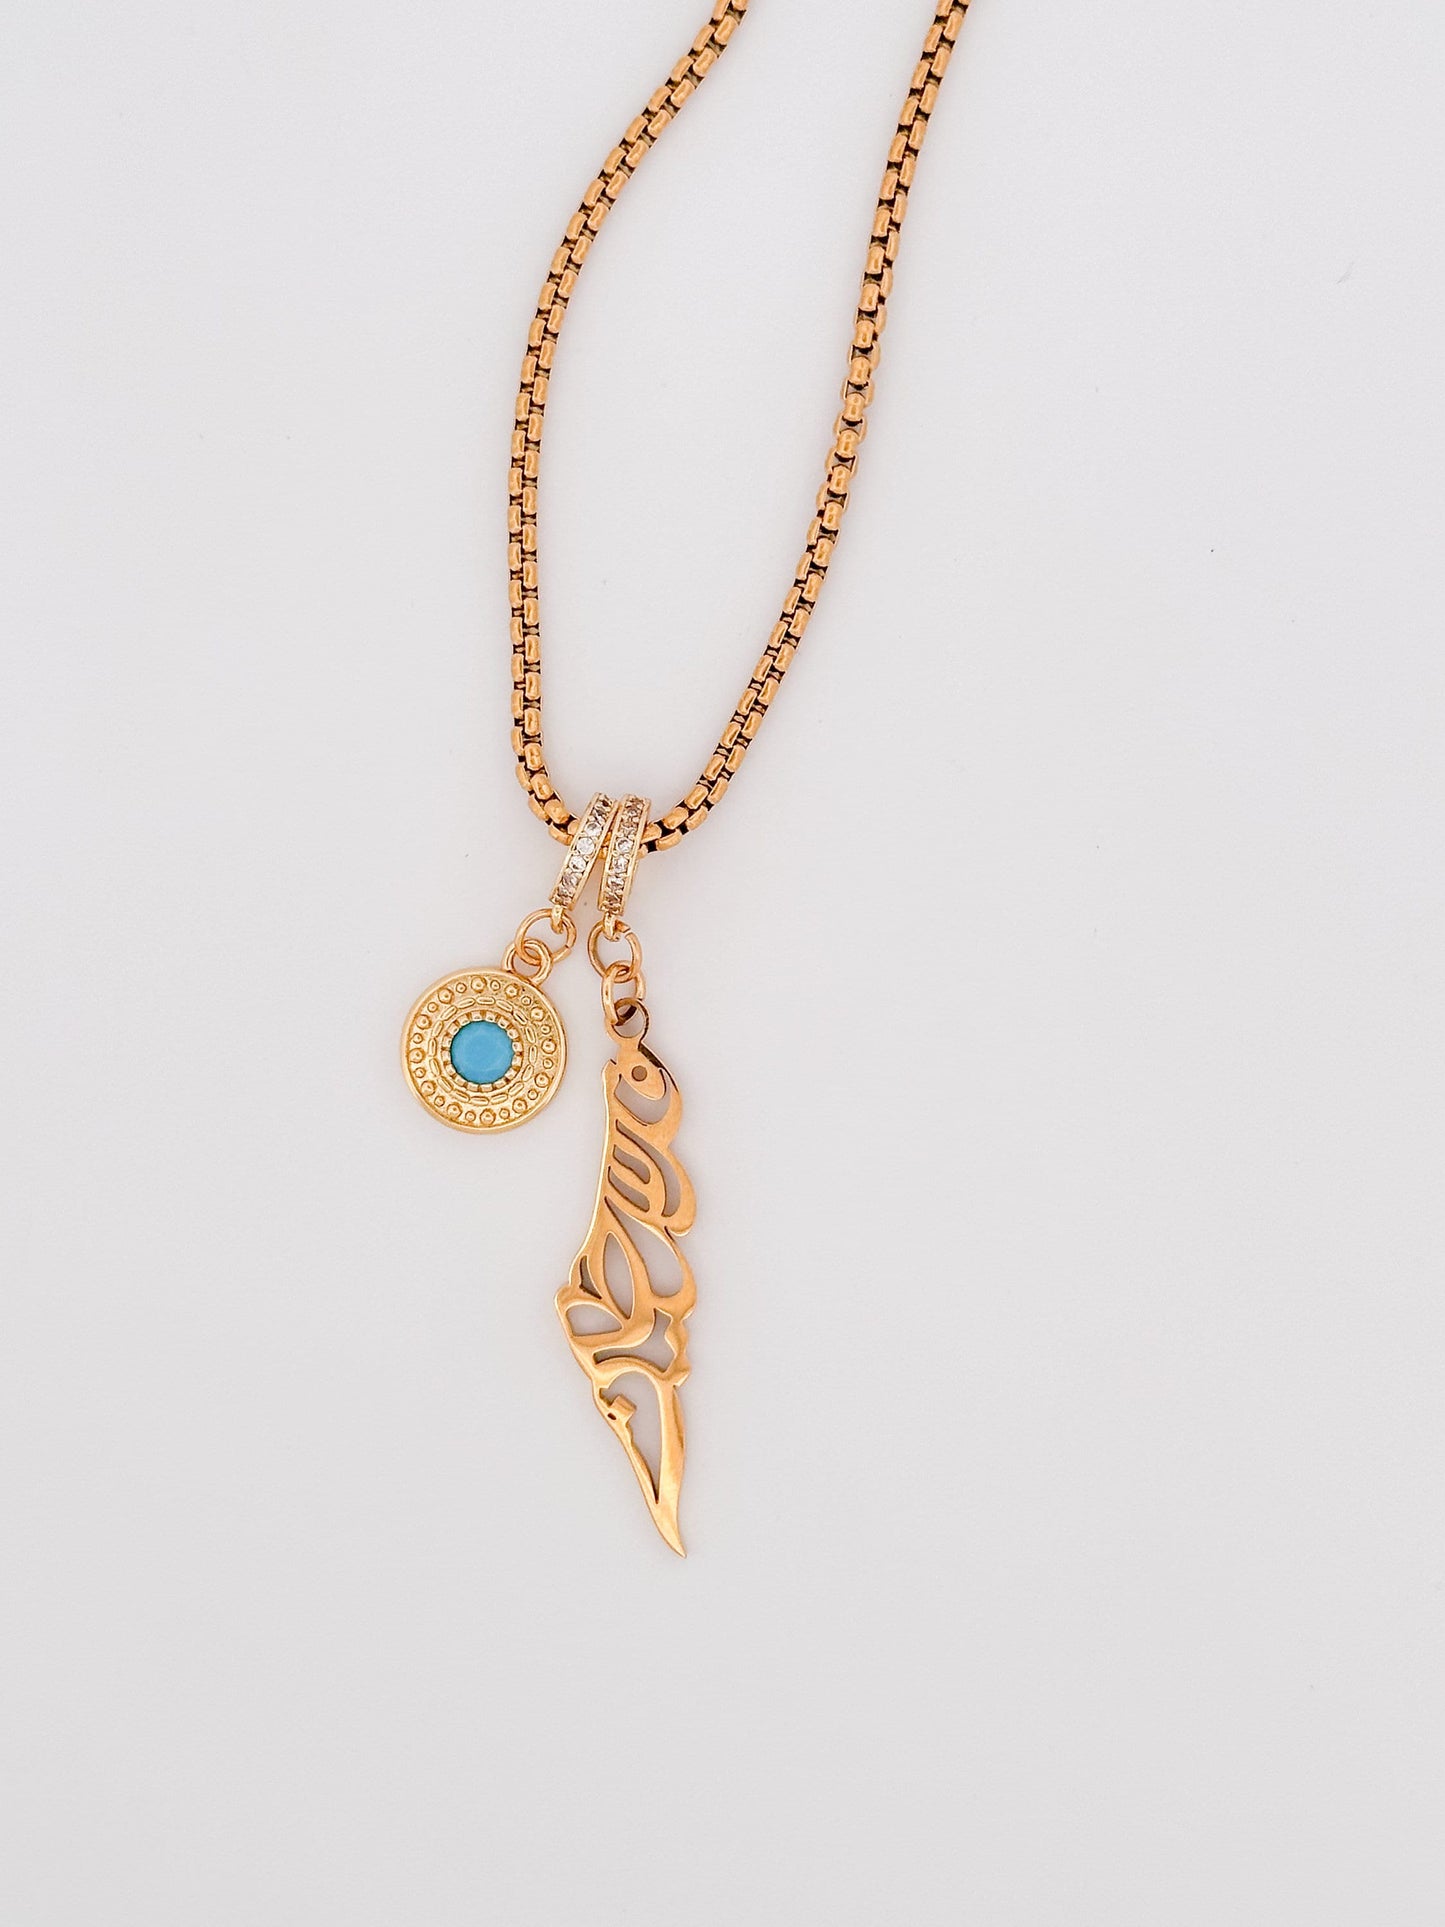 Palestine Map in Arabic calligraphy with Evil Eye Charm Necklace